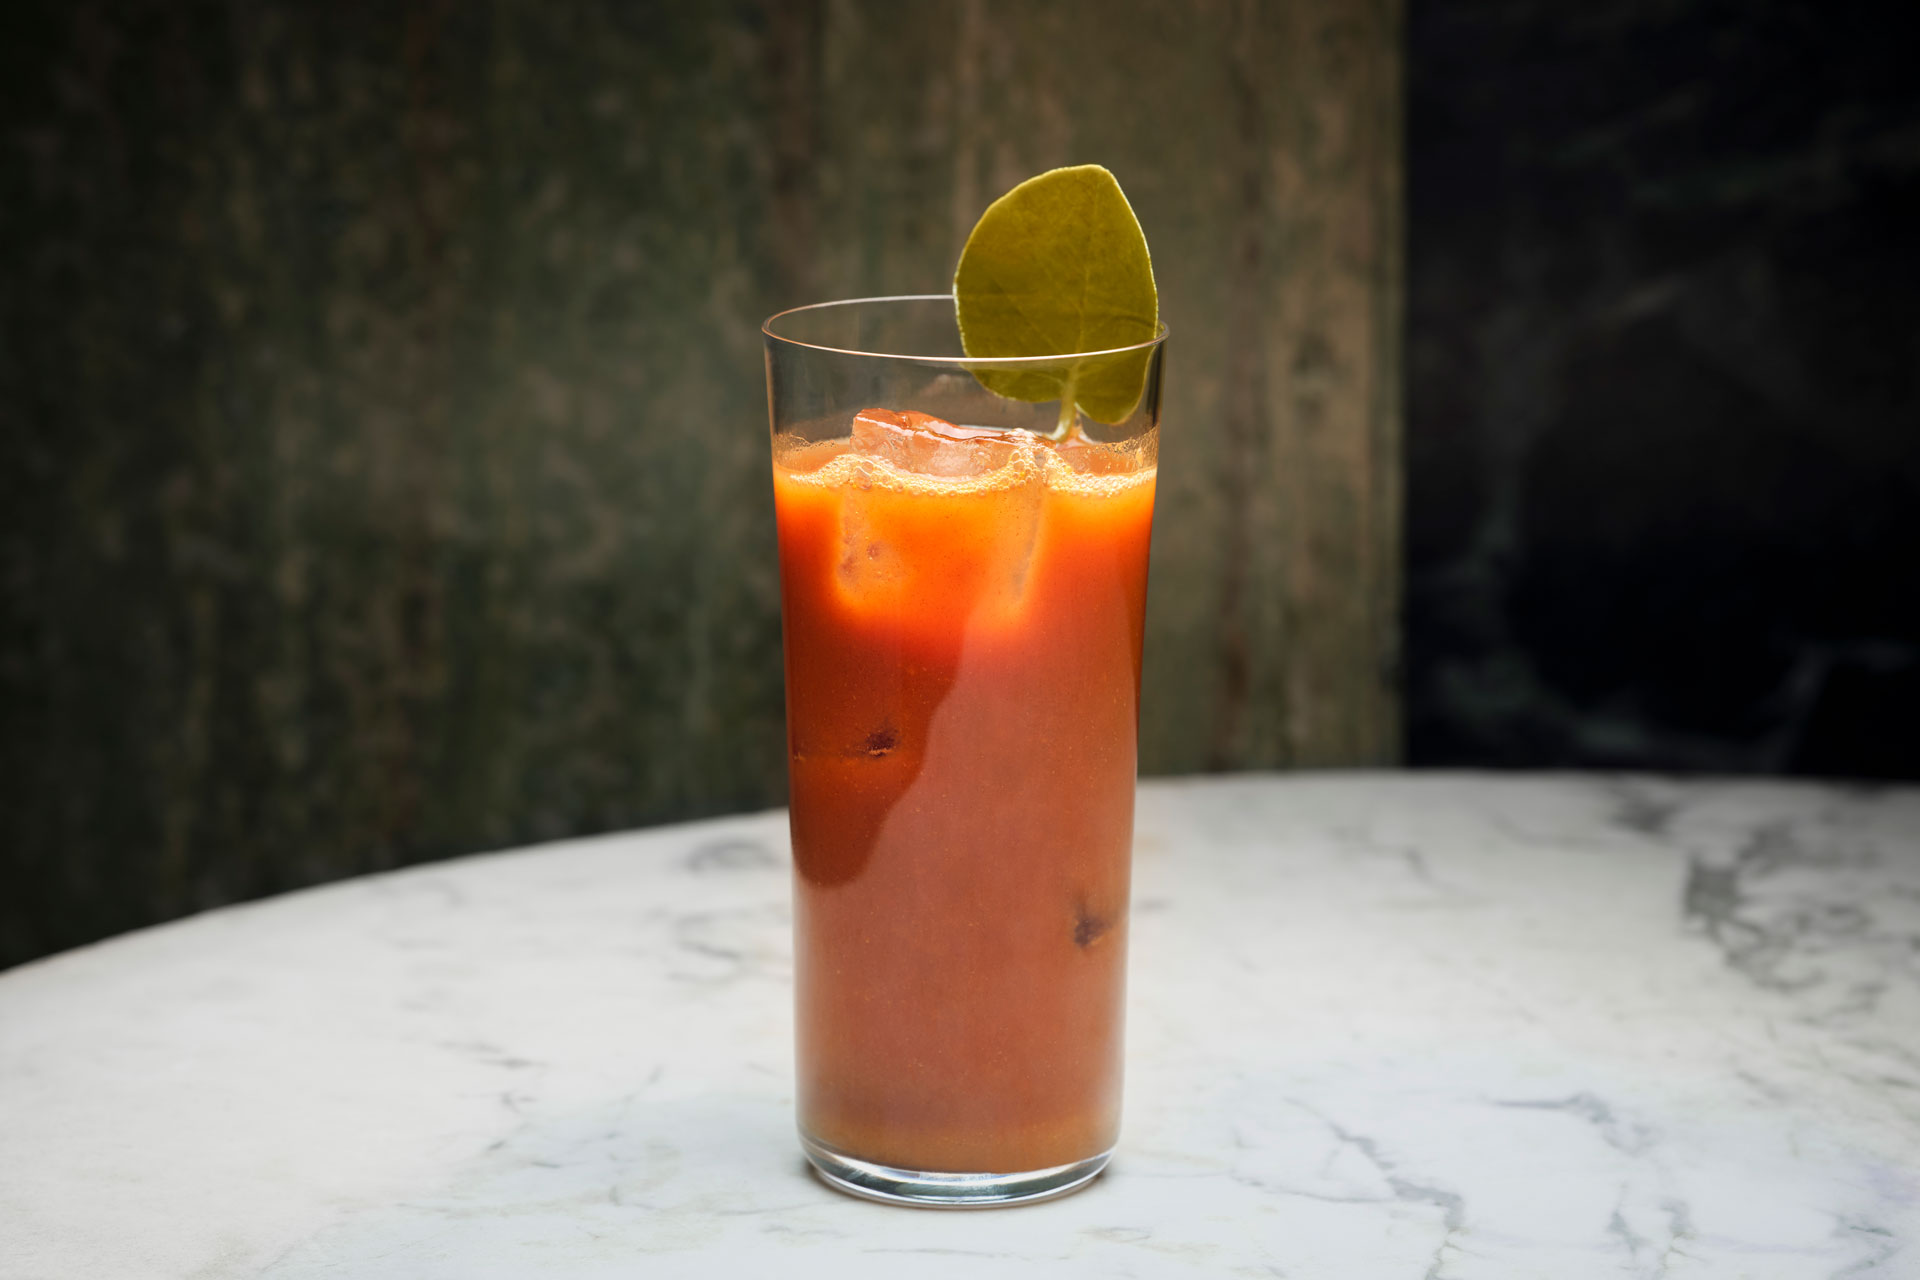 Savoury Cocktails Are Having A Moment